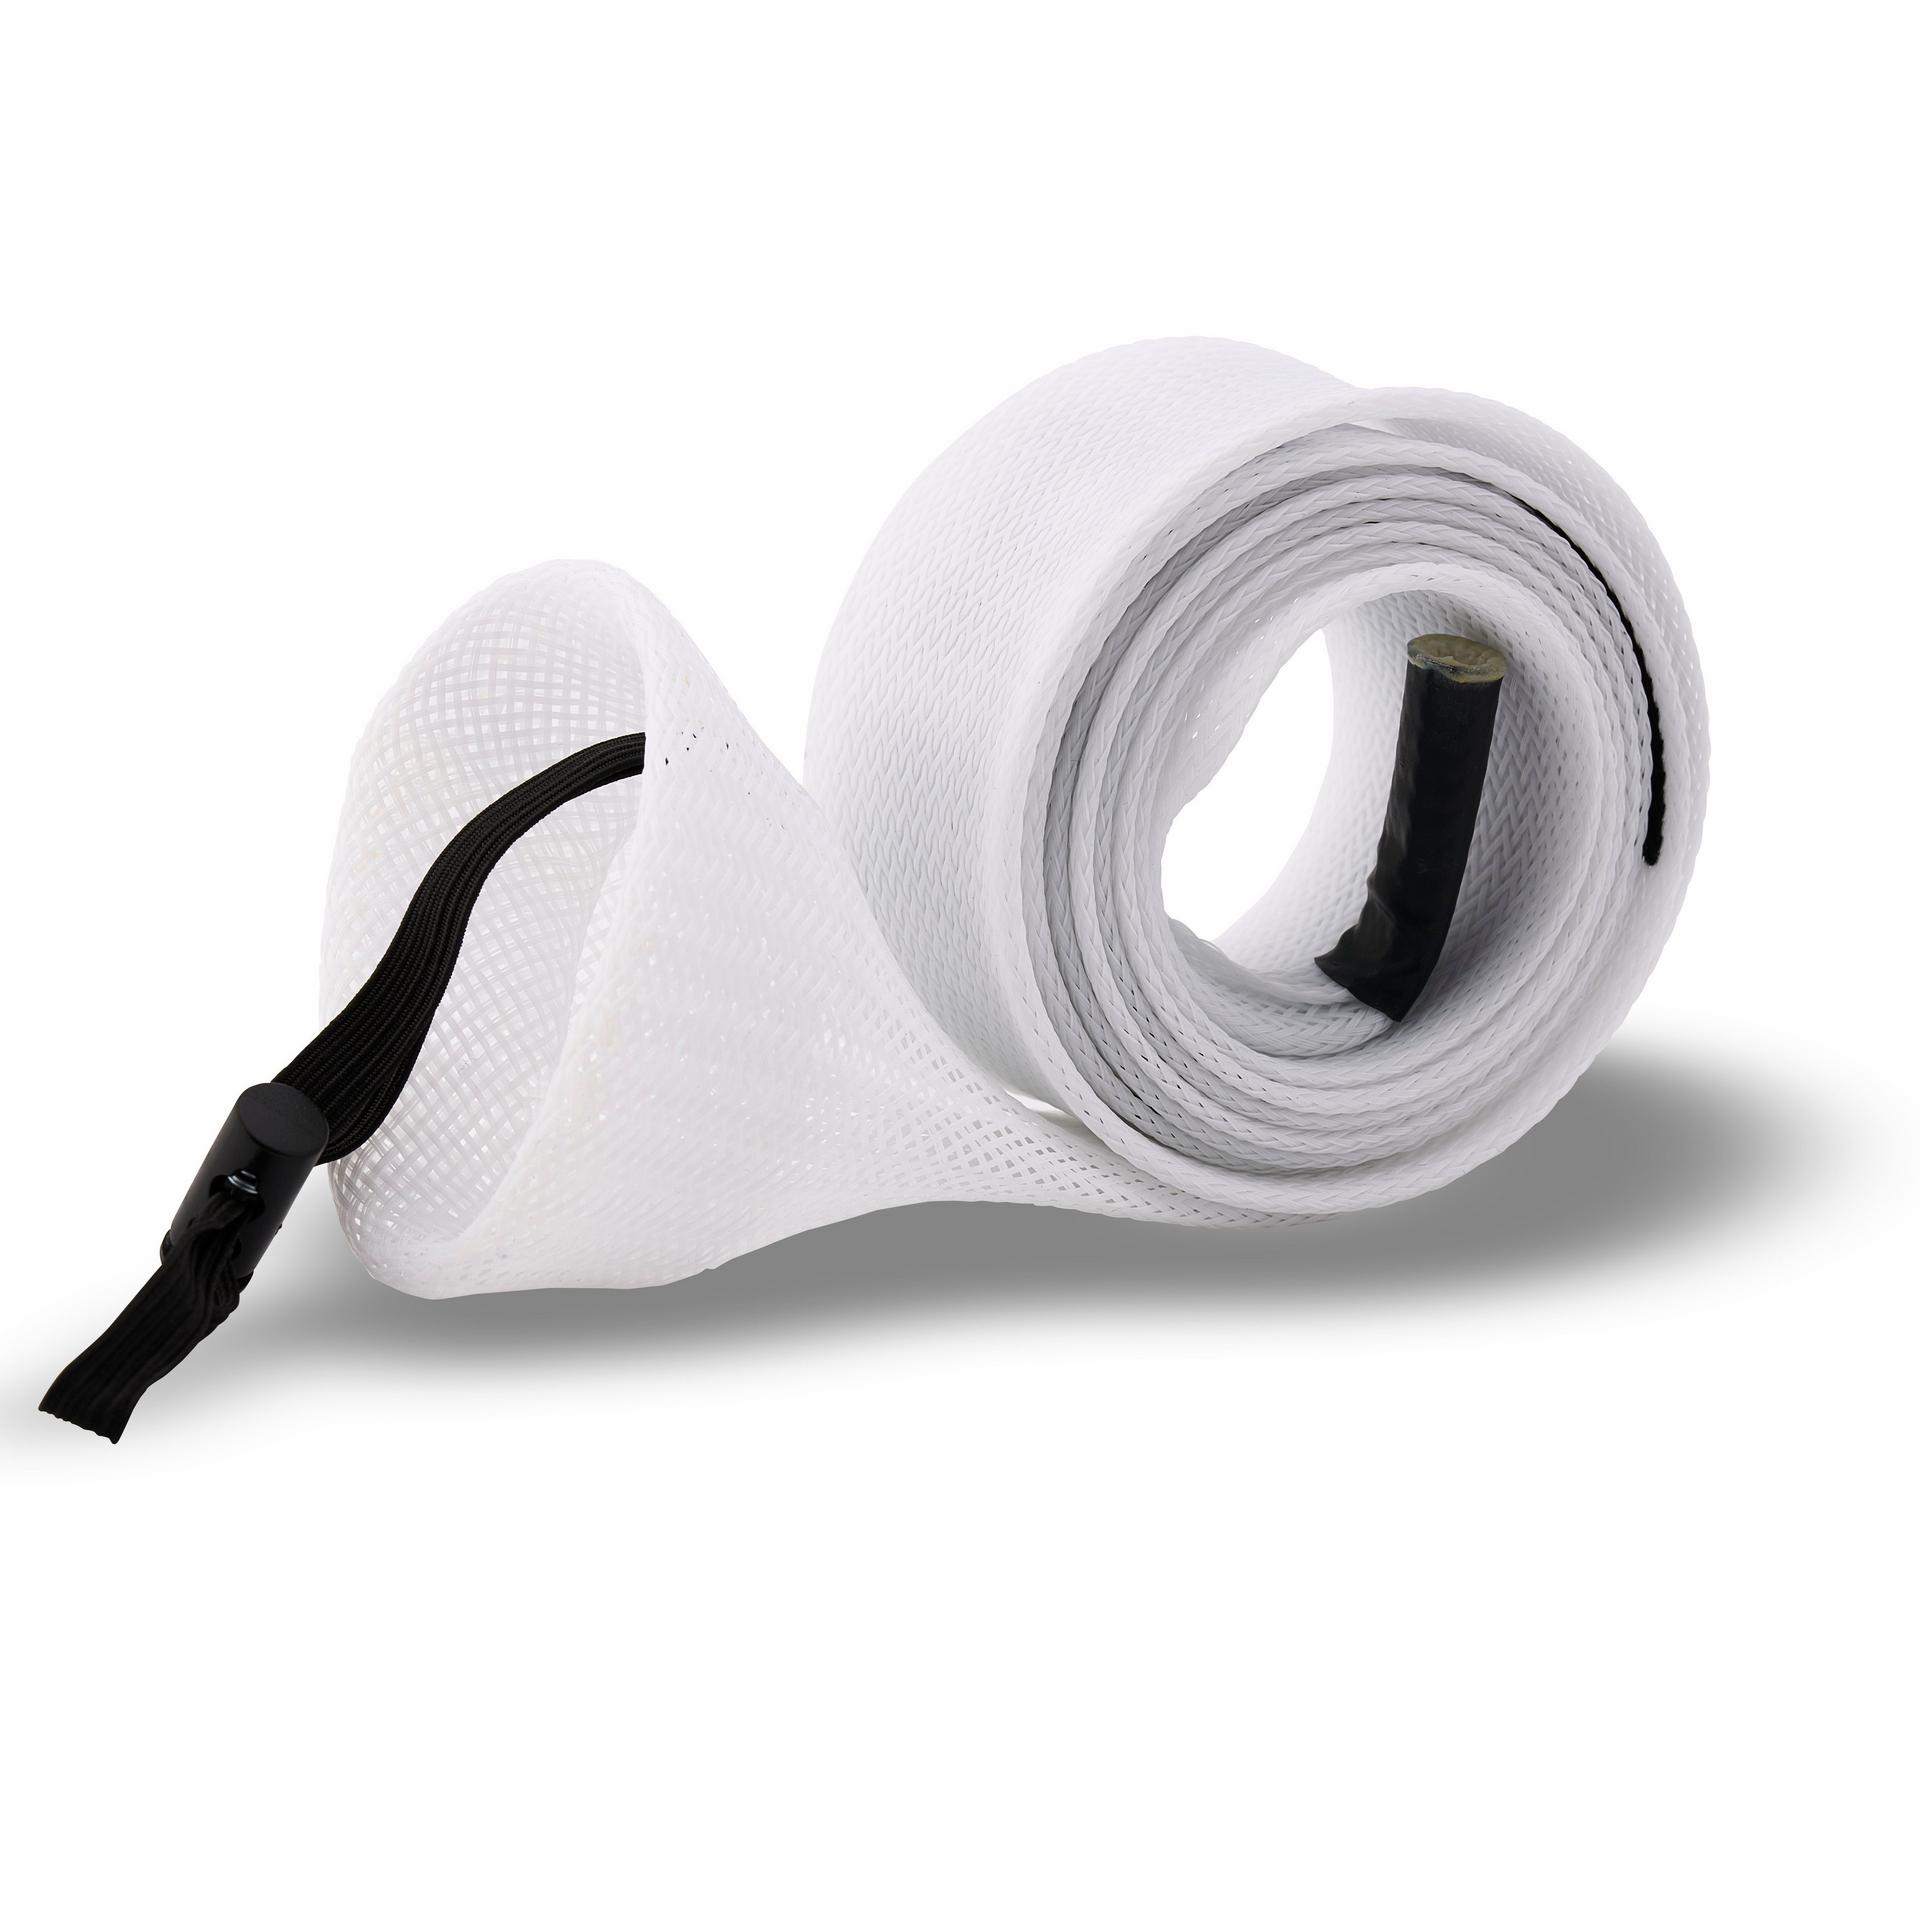 Wholesale plastic rod sleeves To Elevate Your Fishing Game